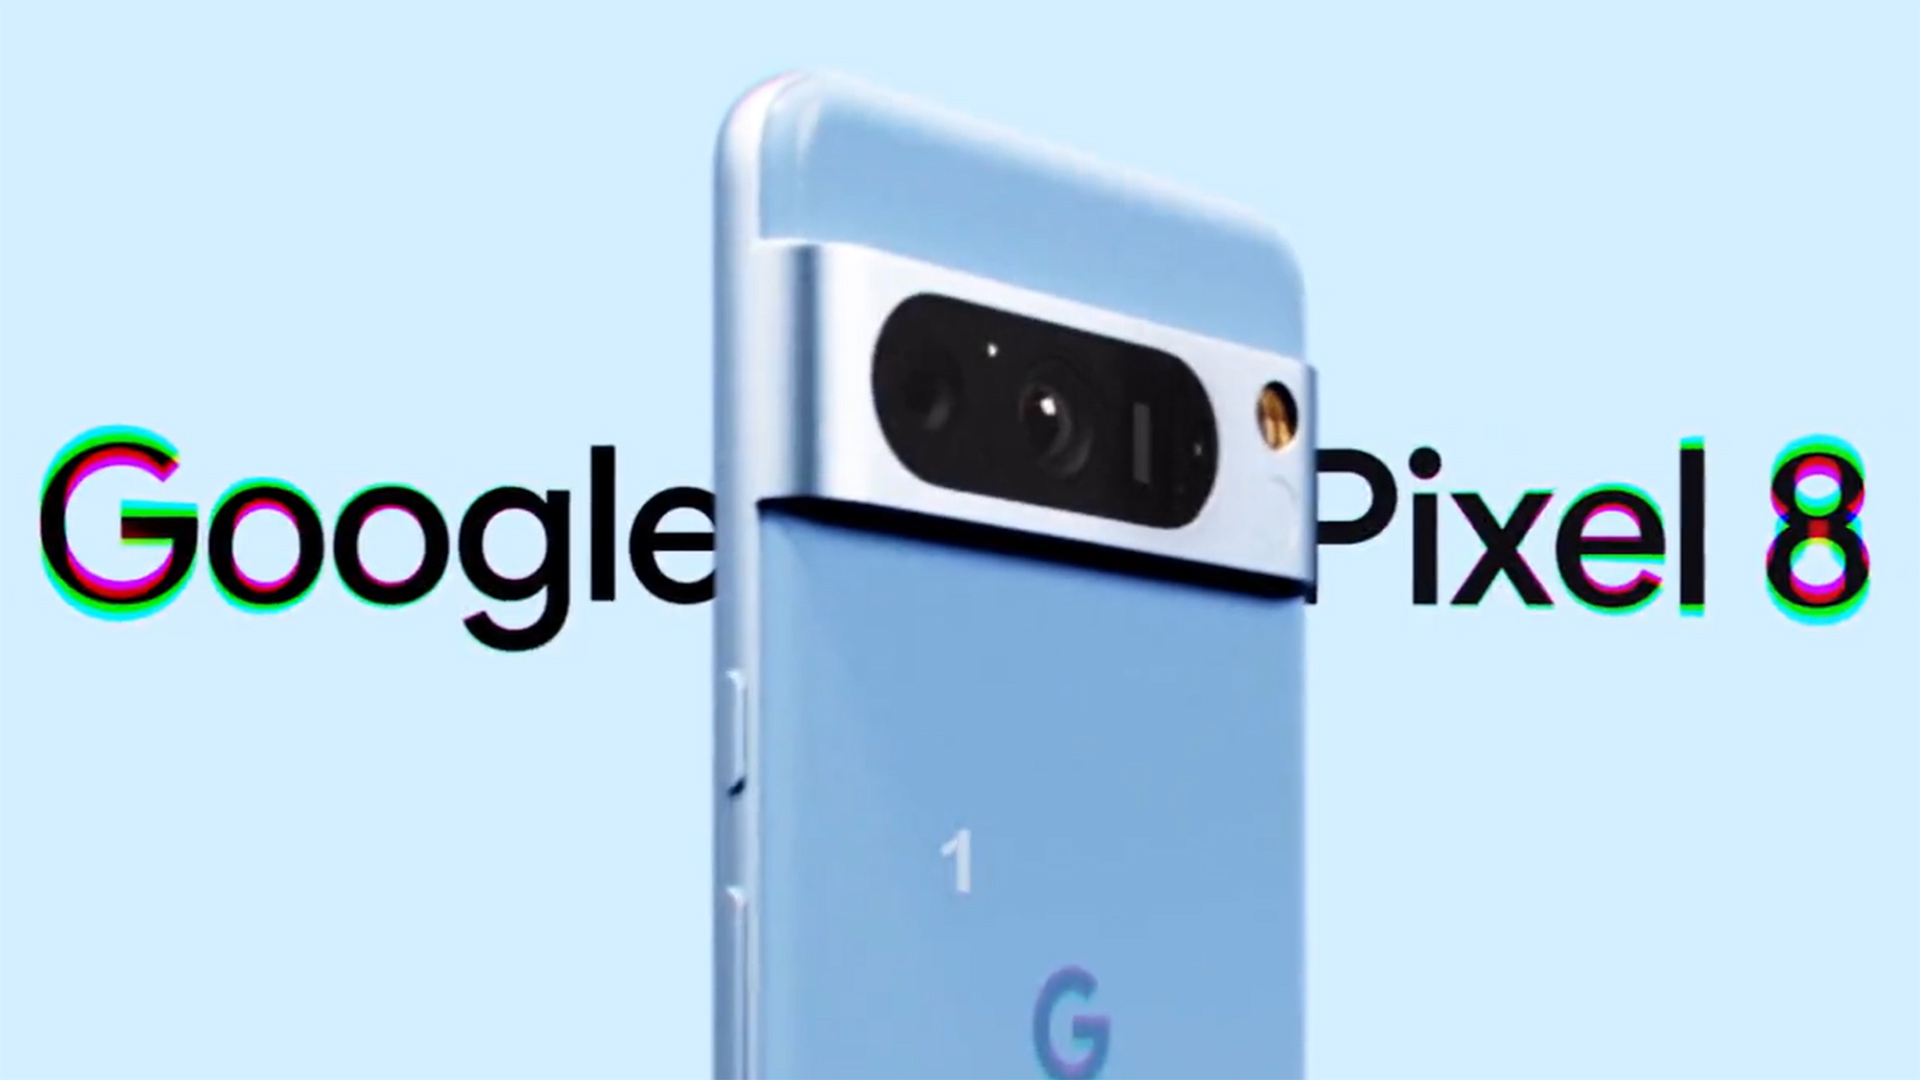 Google Pixel 8 promo video shows the smartphone's design, blue colouring and Audio Magic Eraser feature